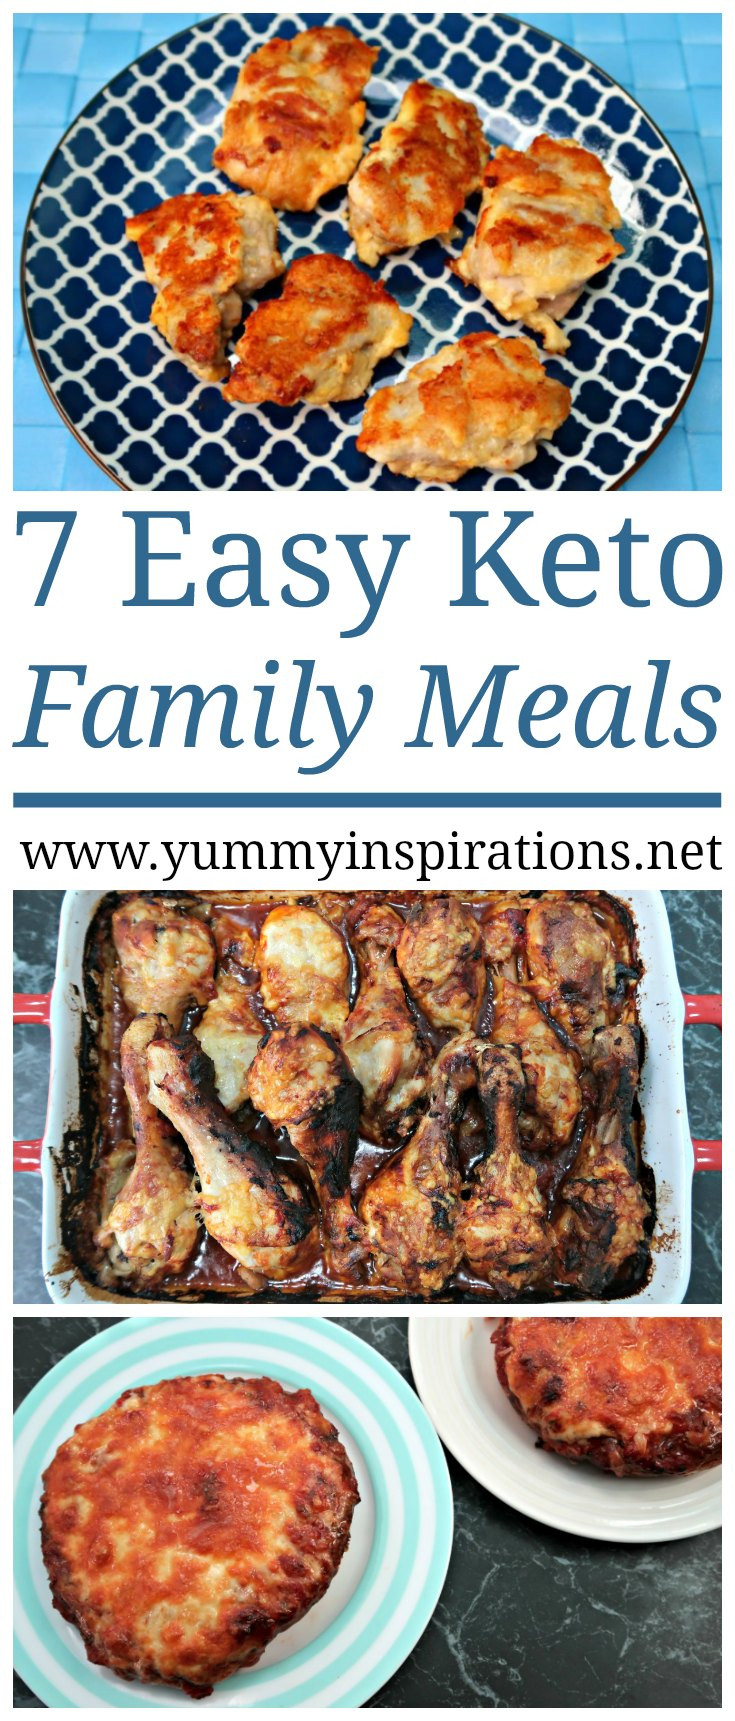 Keto Diet Plan For Picky Eaters
 7 Keto Family Meals How to follow the Ketogenic Diet